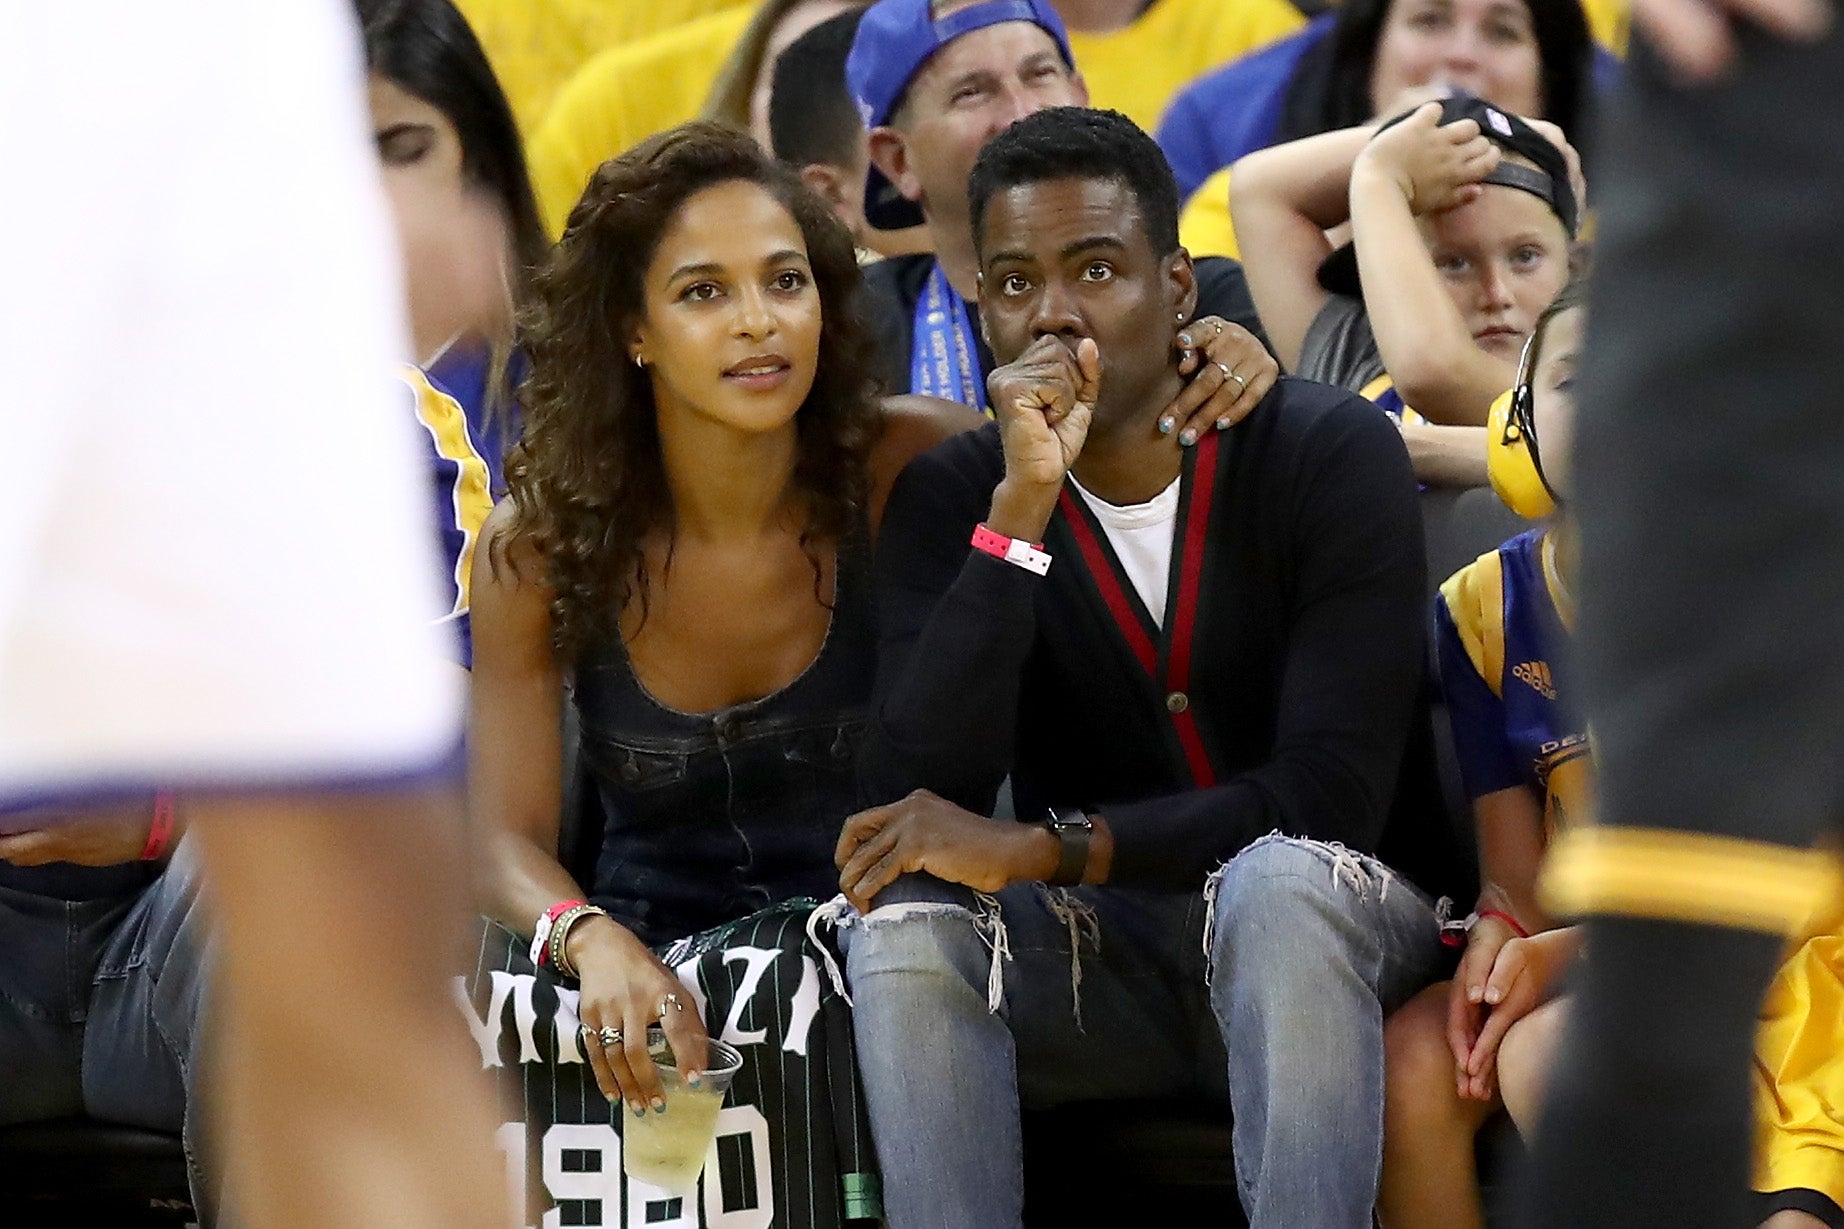 The NBA Finals Were A Star-Studded Event On And Off The Court
